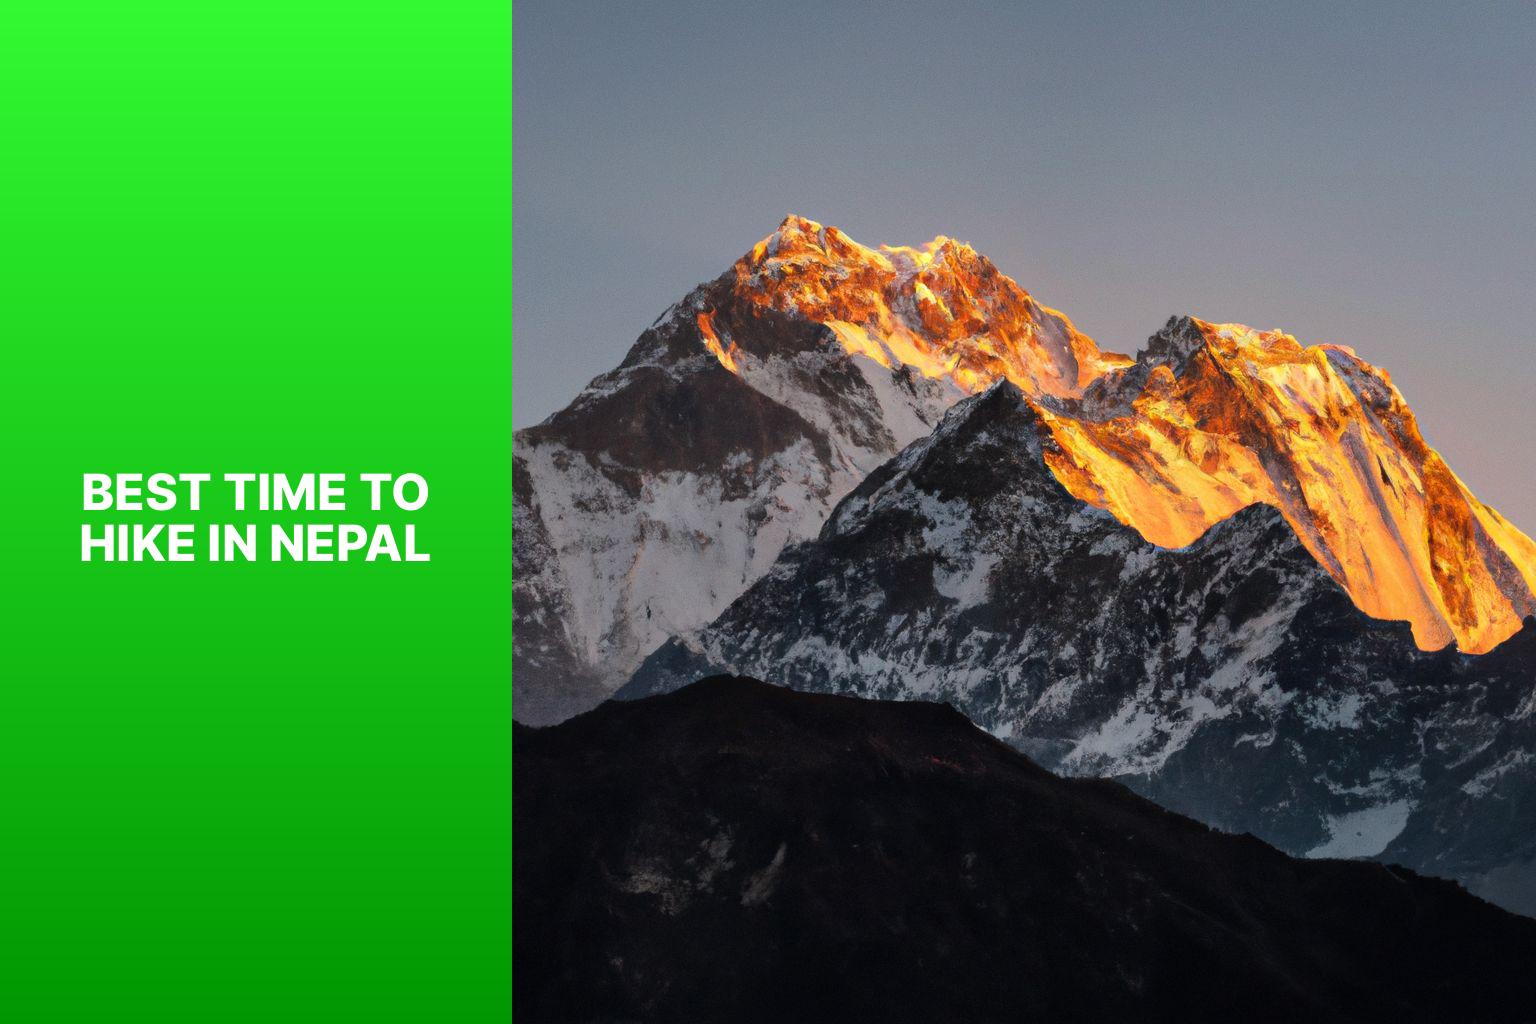 best time to hike in nepal3n4e